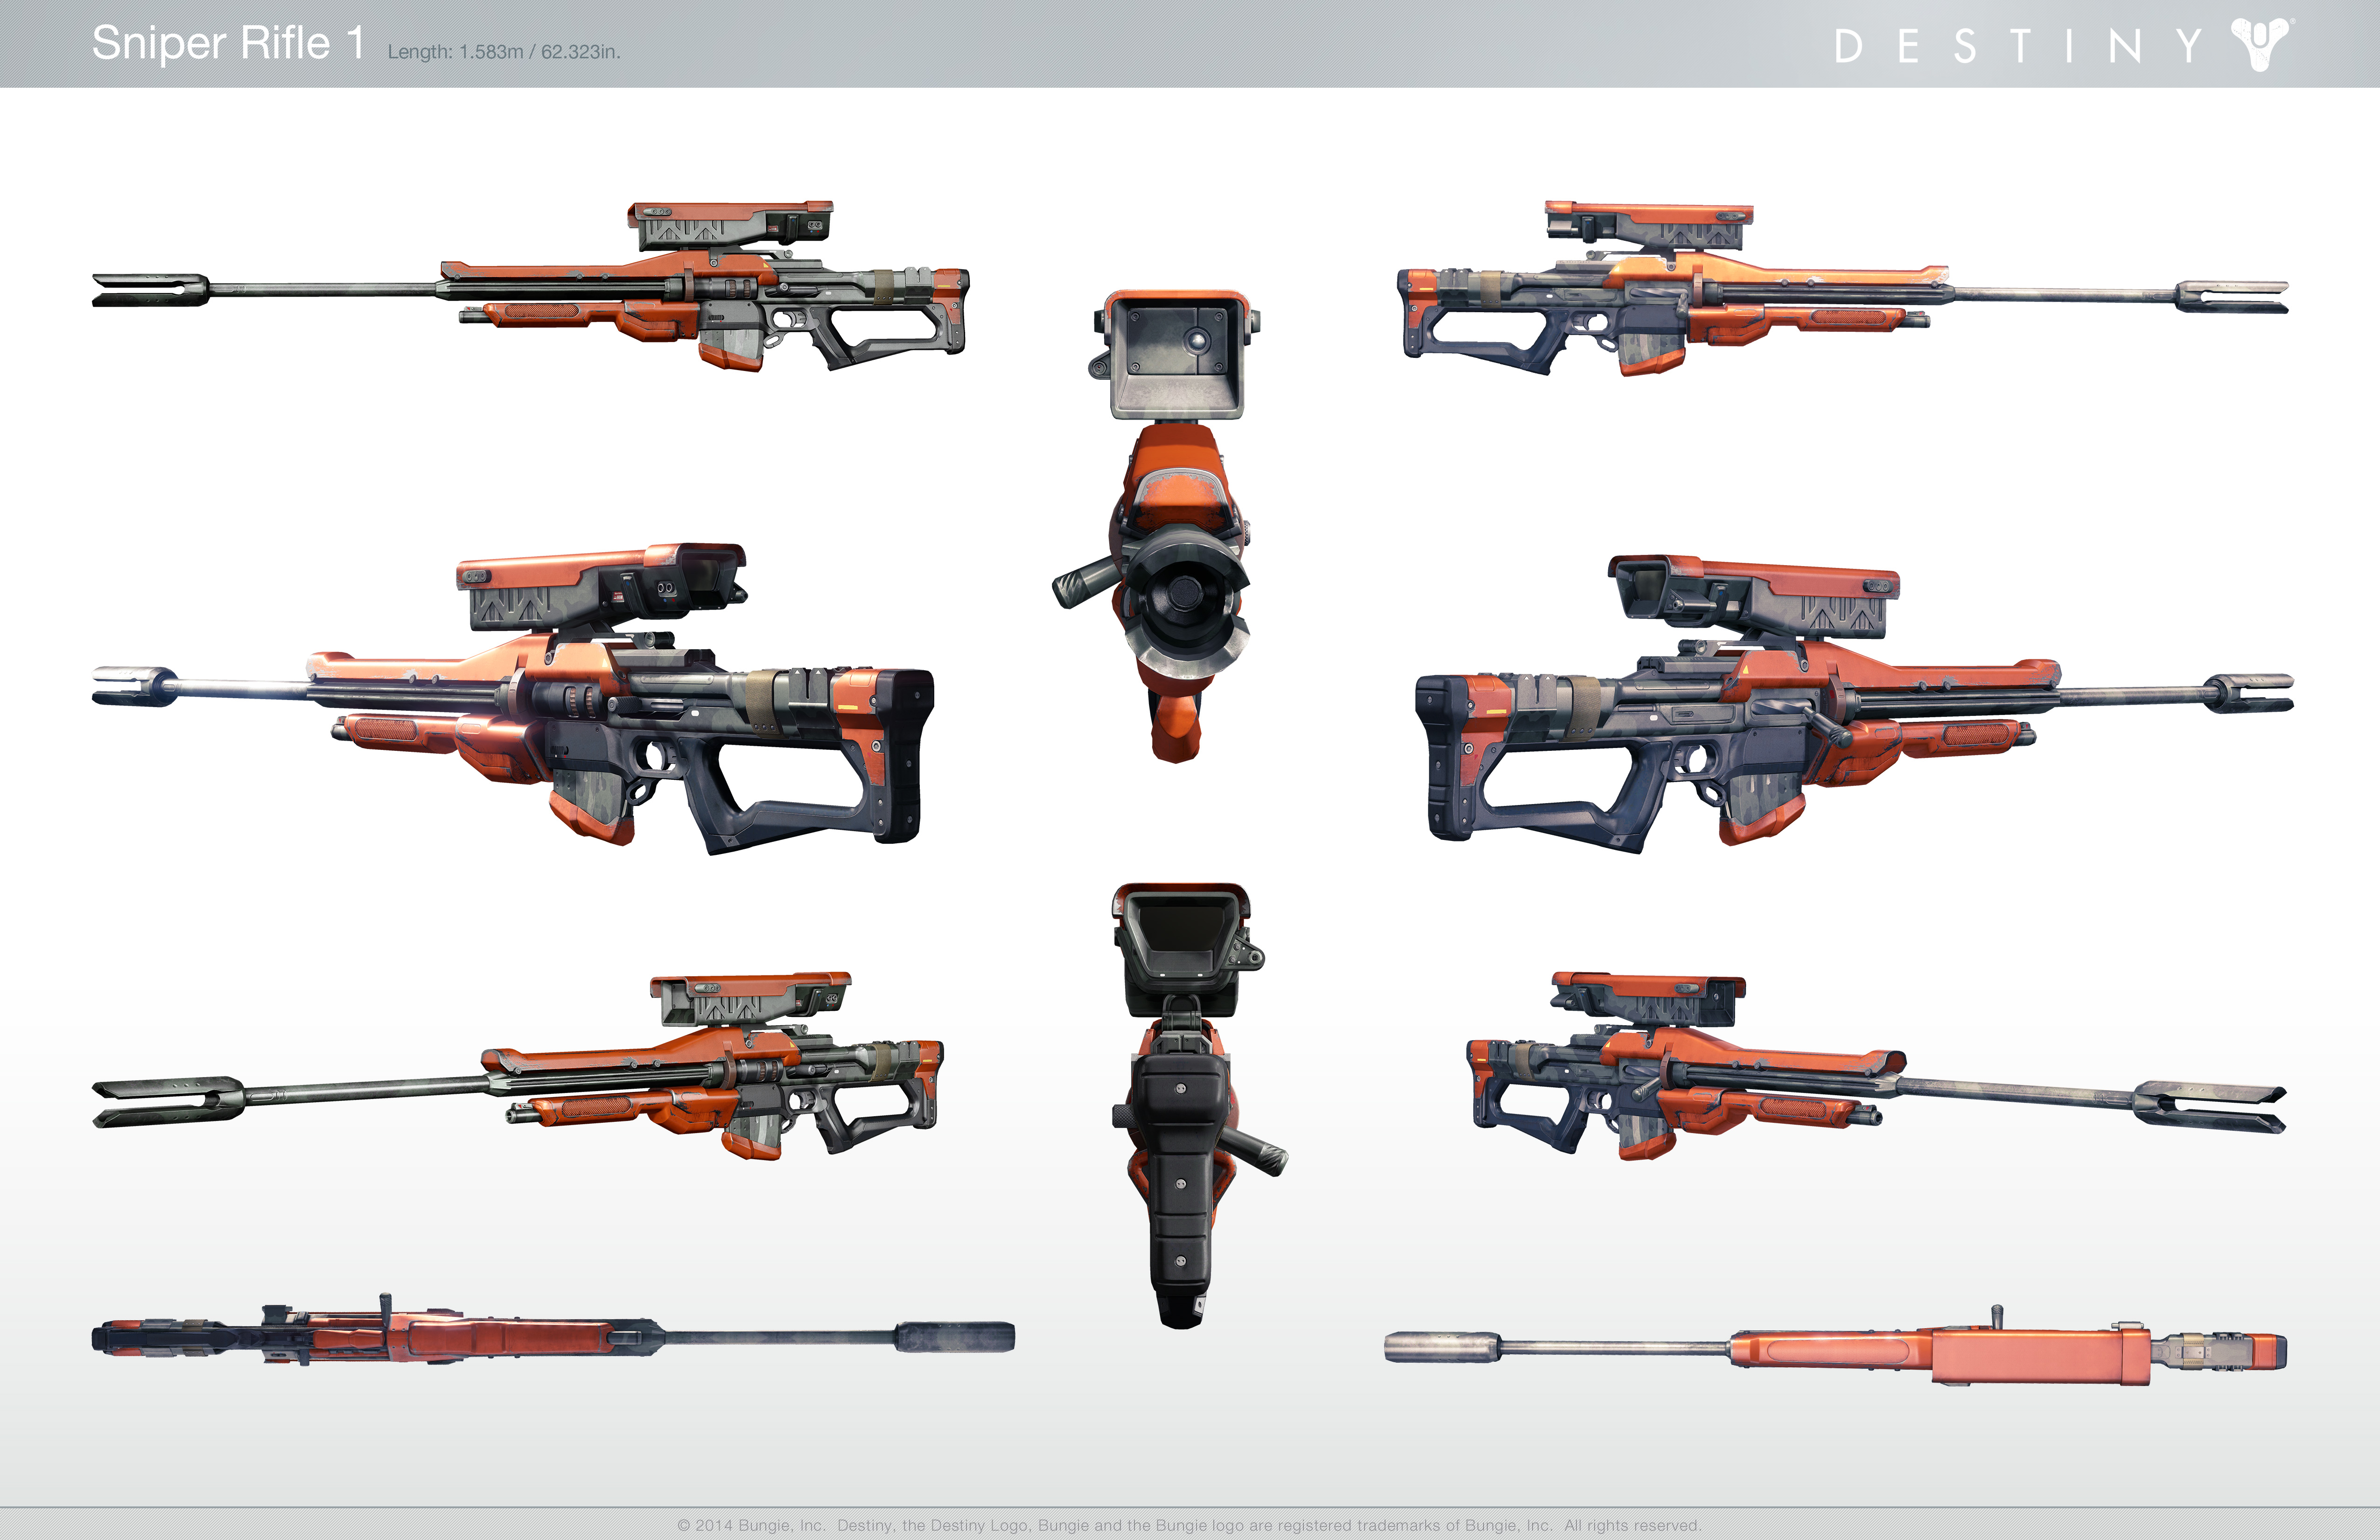 Dress Up as Your Favorite Guardian With This Handy Destiny ... - 5100 x 3300 jpeg 2168kB